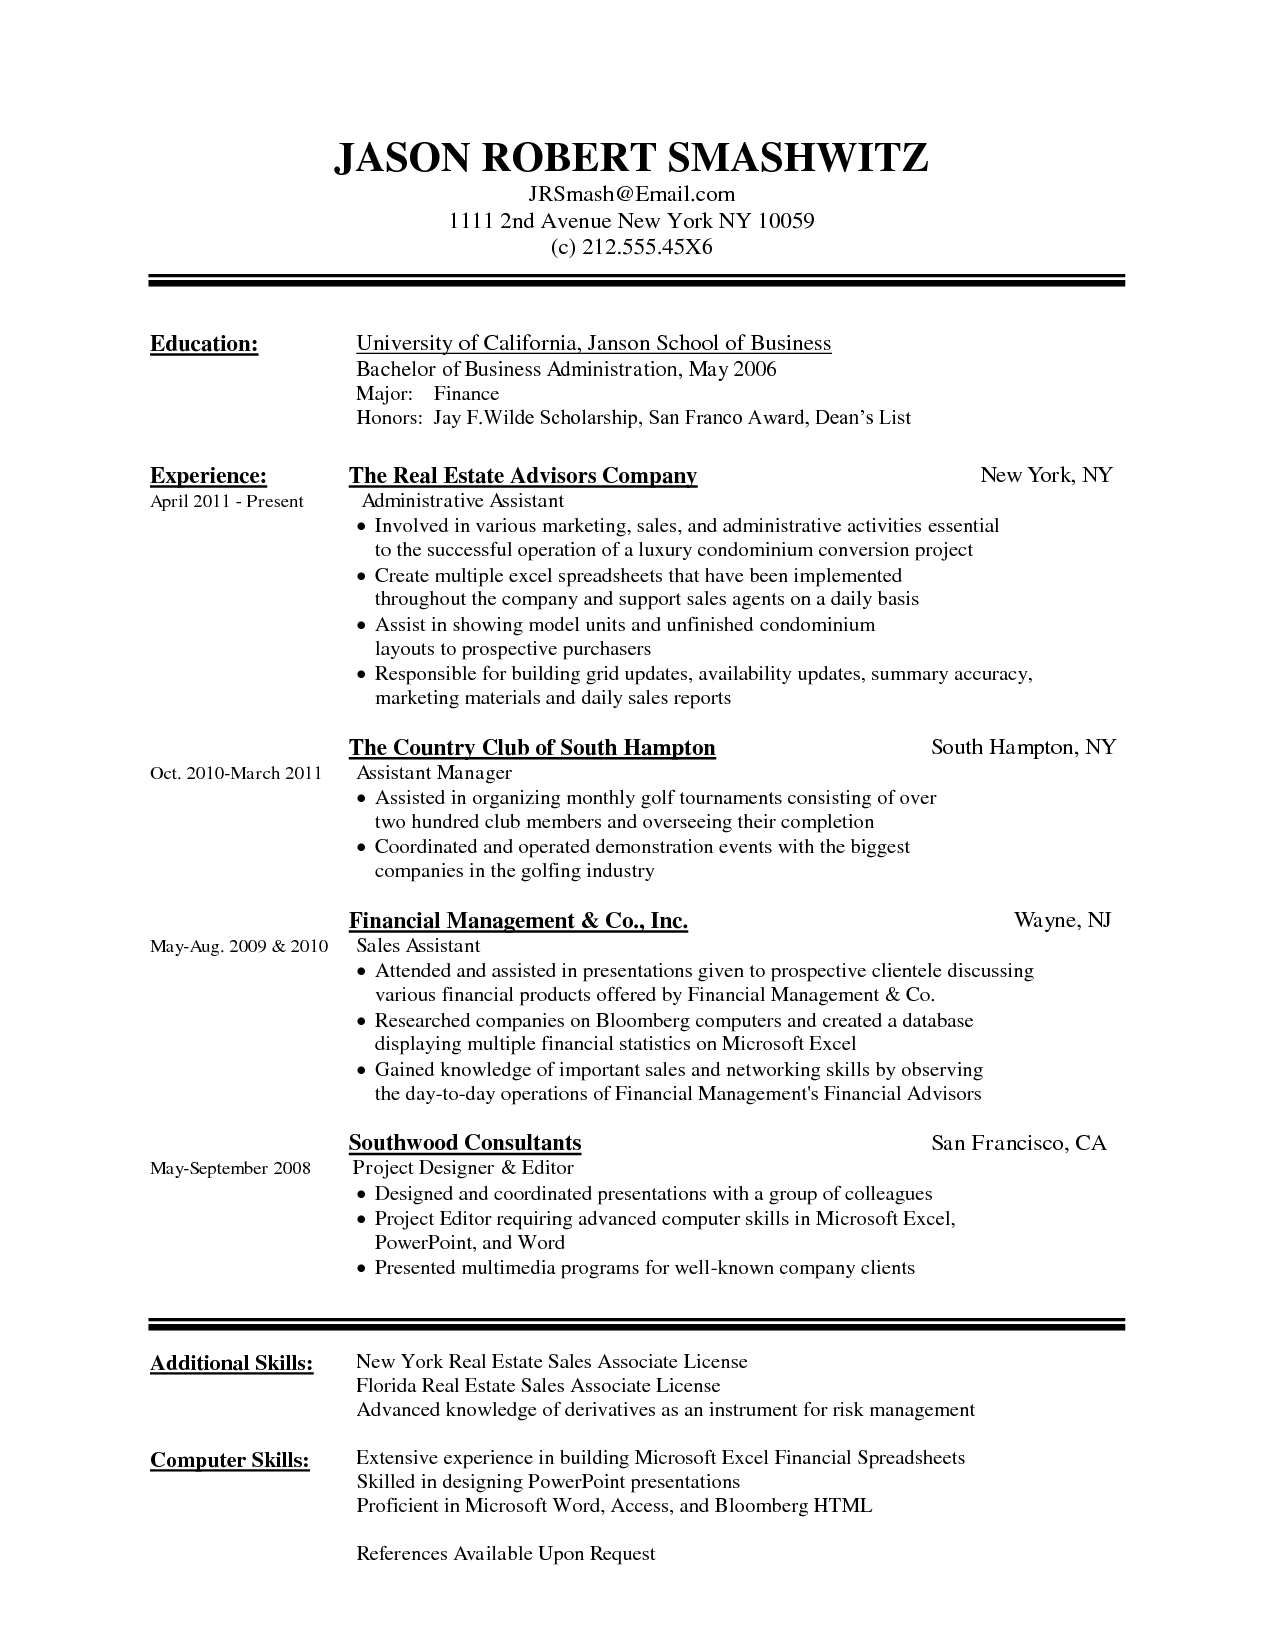 Resume Template Word 2013 – Free Resume Templates Throughout Resume Templates Word 2013